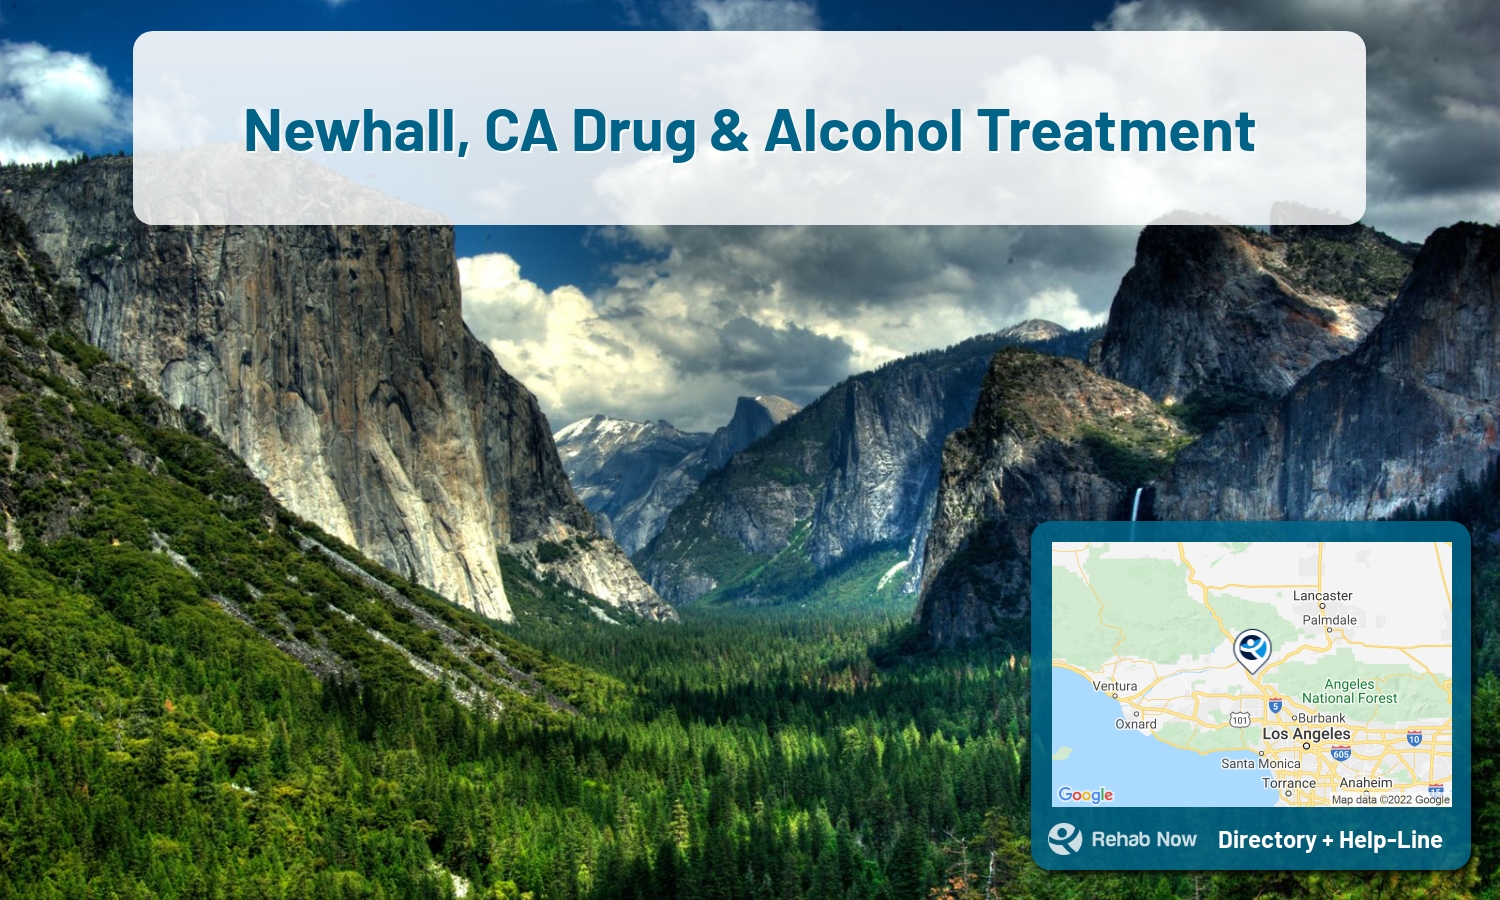 Newhall, CA Treatment Centers. Find drug rehab in Newhall, California, or detox and treatment programs. Get the right help now!